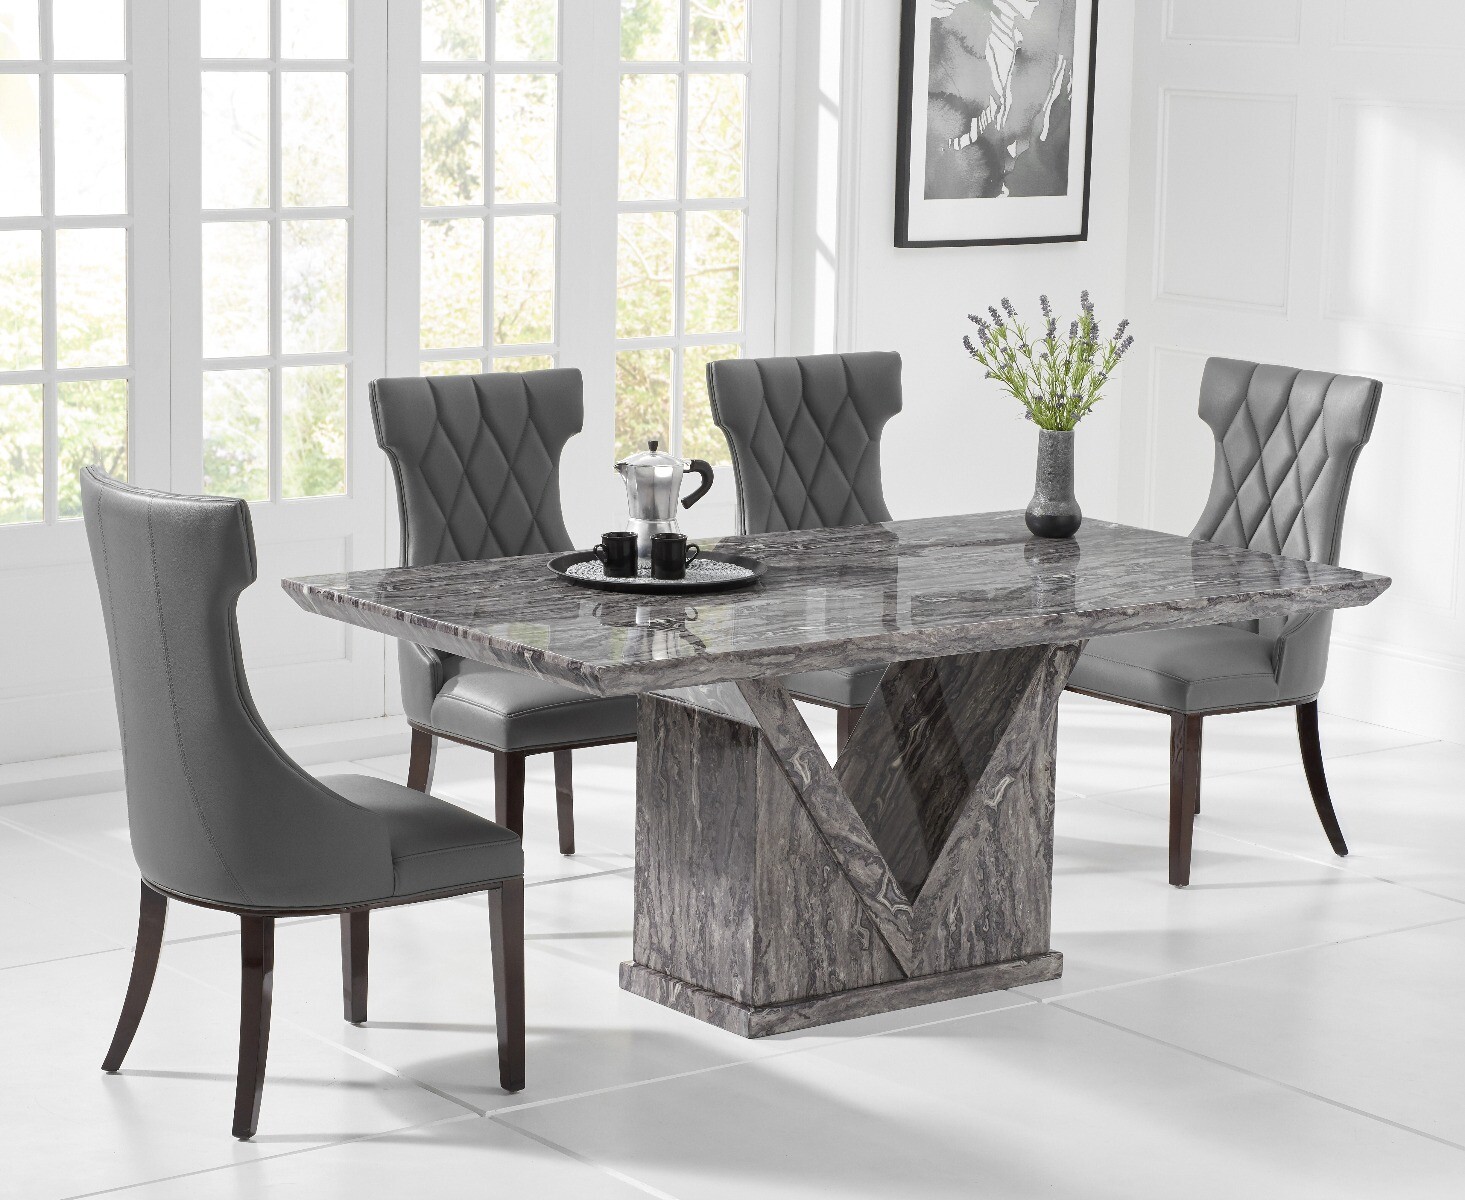 Milan 160cm Grey Marble Dining Table With 6 Cream Sophia Chairs